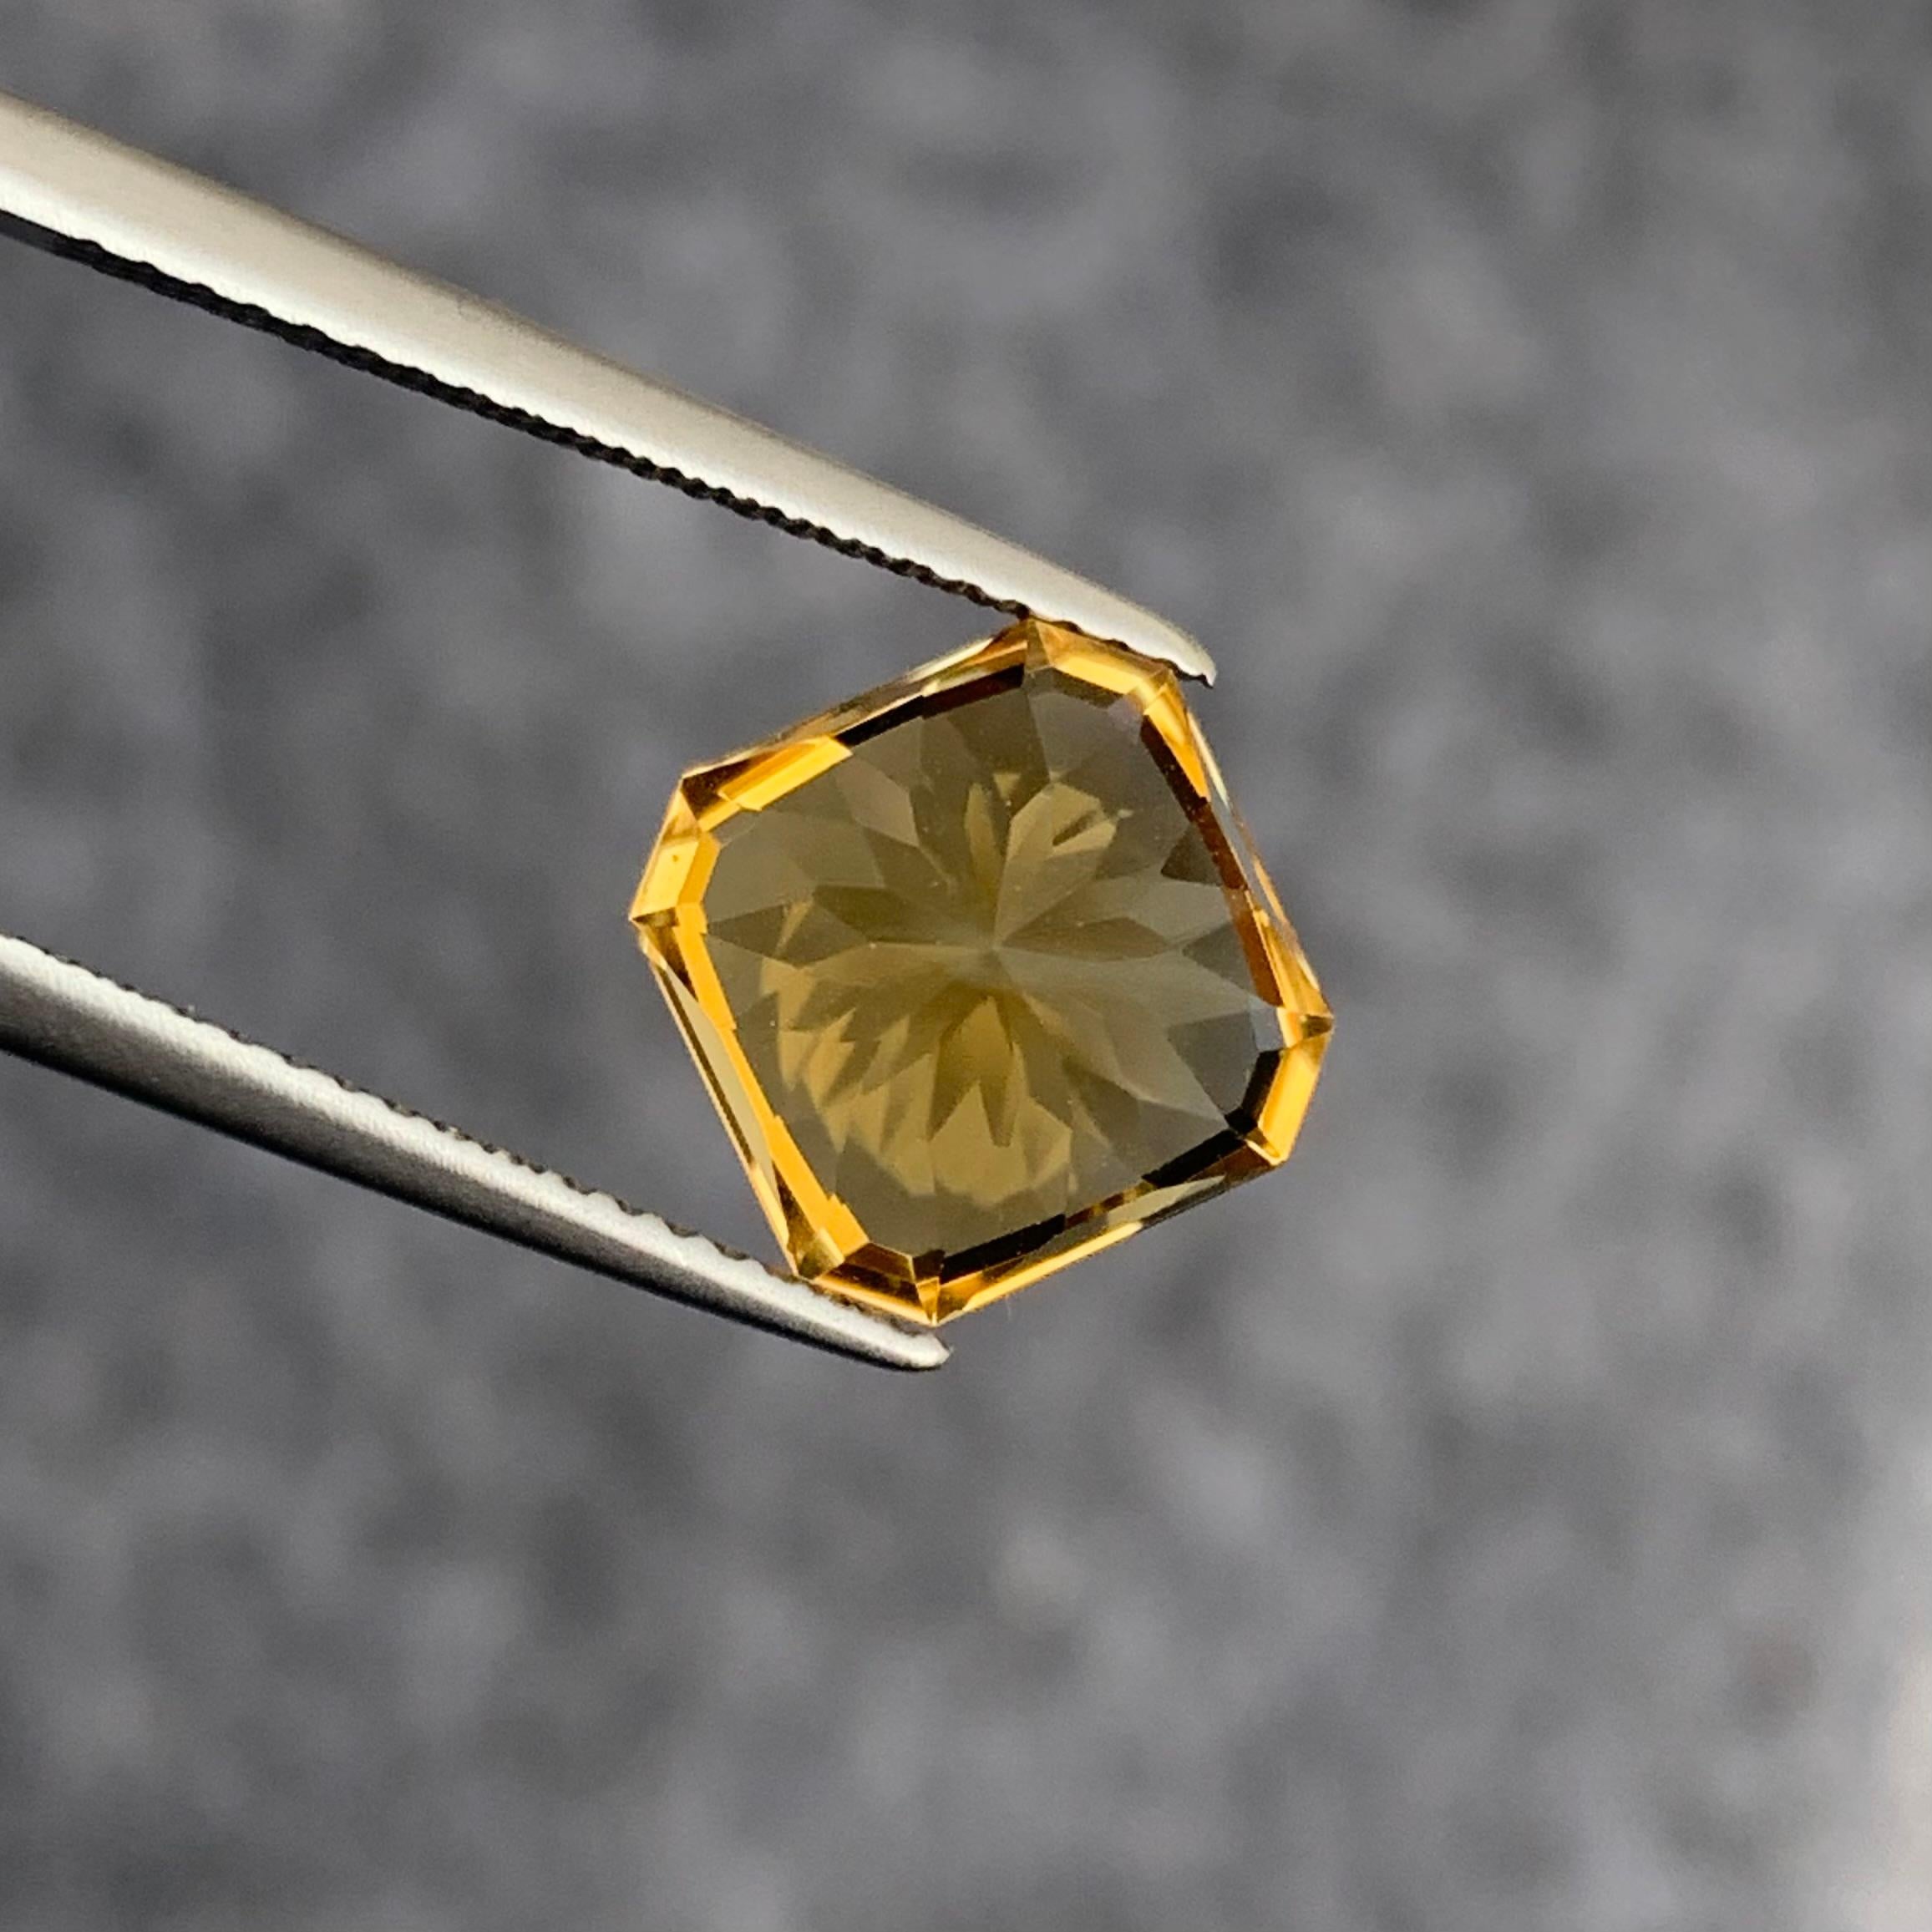 Gorgeous Flower Cut Faceted Yellow Citrine 3.80 Carat From Brazil For Sale 2